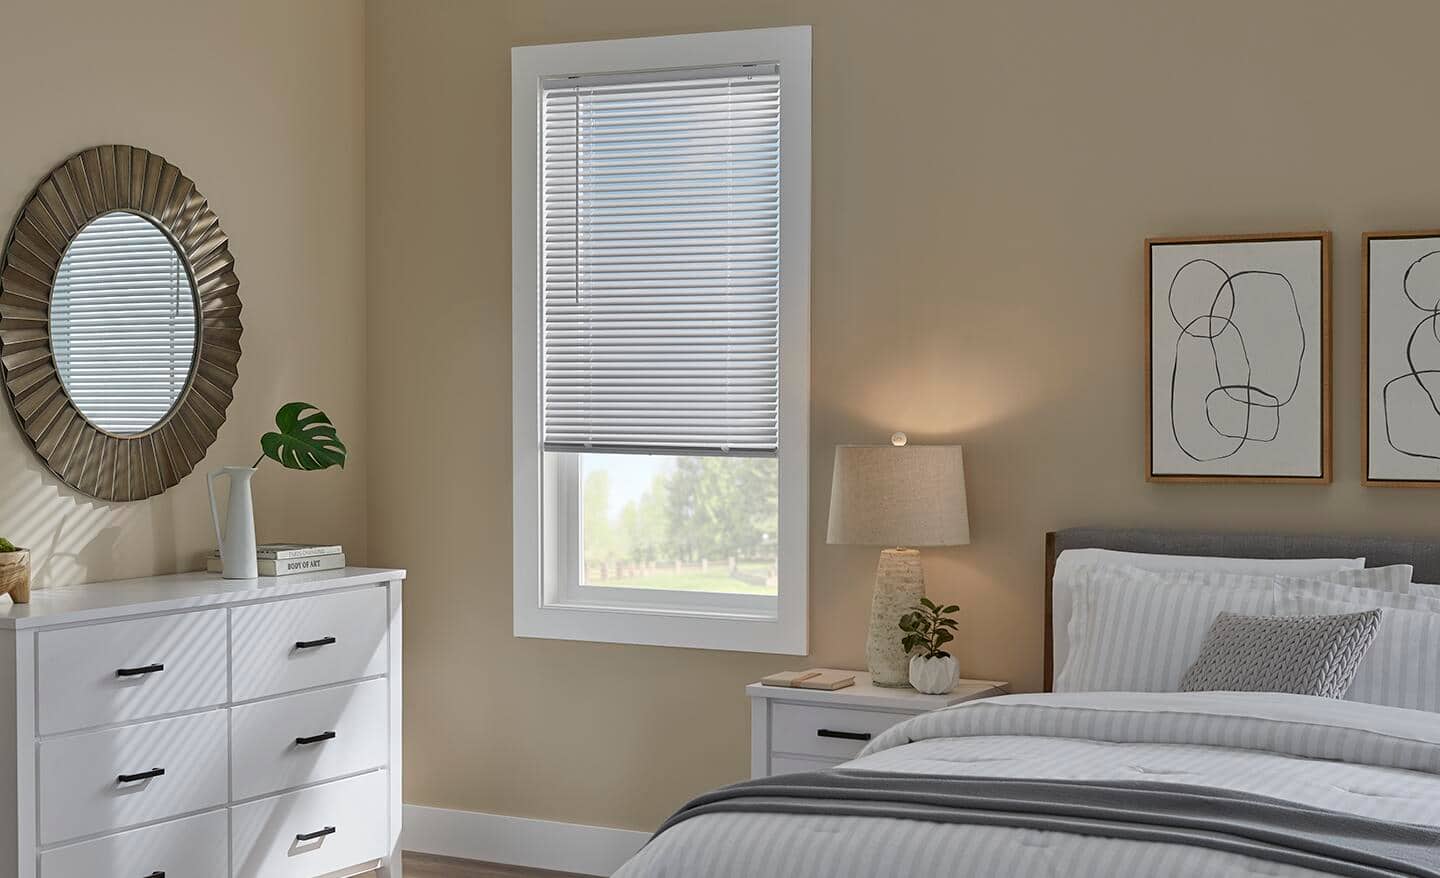 Aluminum blinds in white cover a bedroom window.